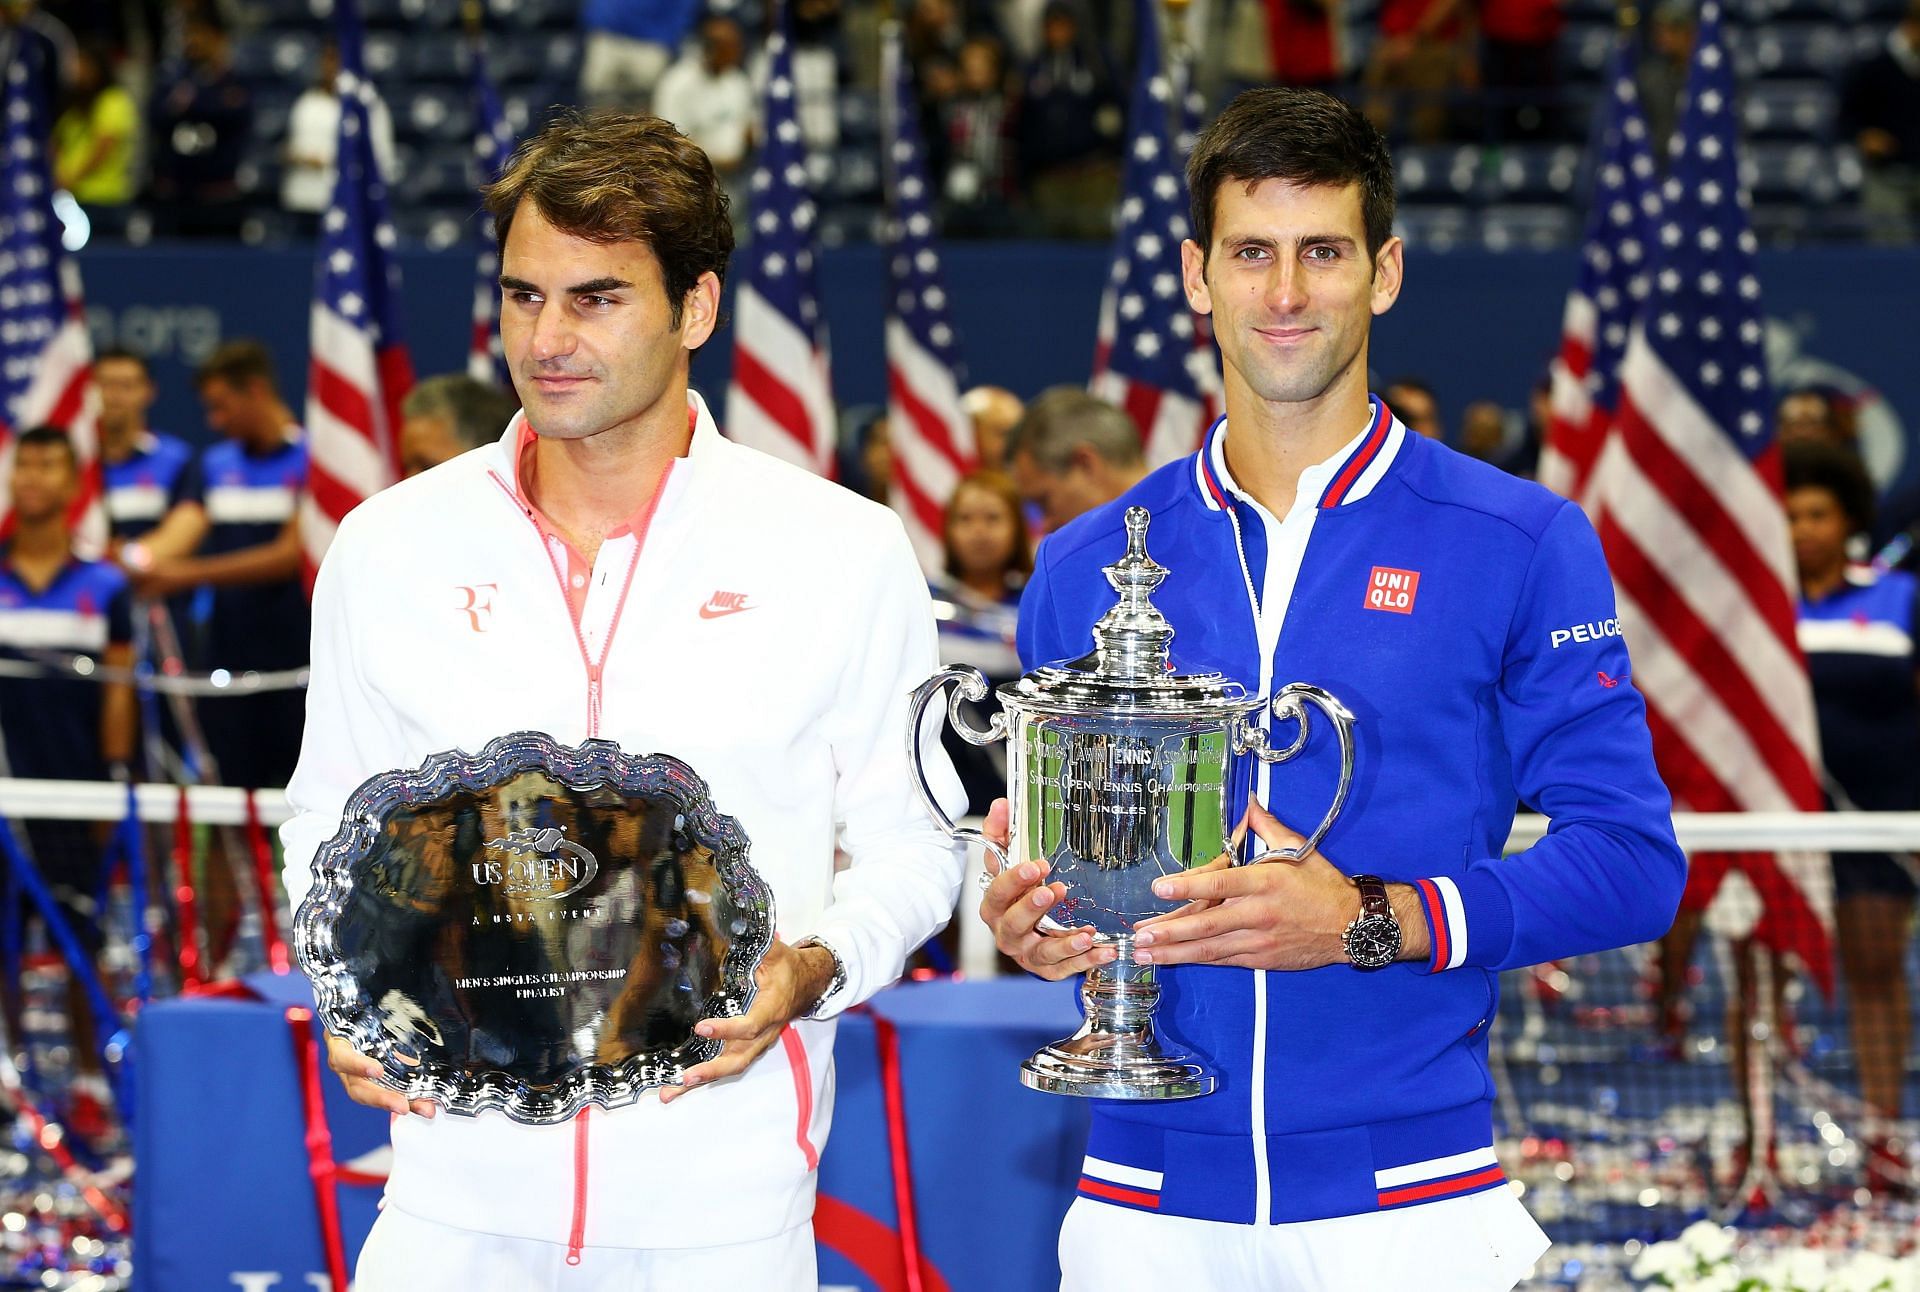 Roger Federer (L) and Novak Djokovic pictured at the 2015 US Open